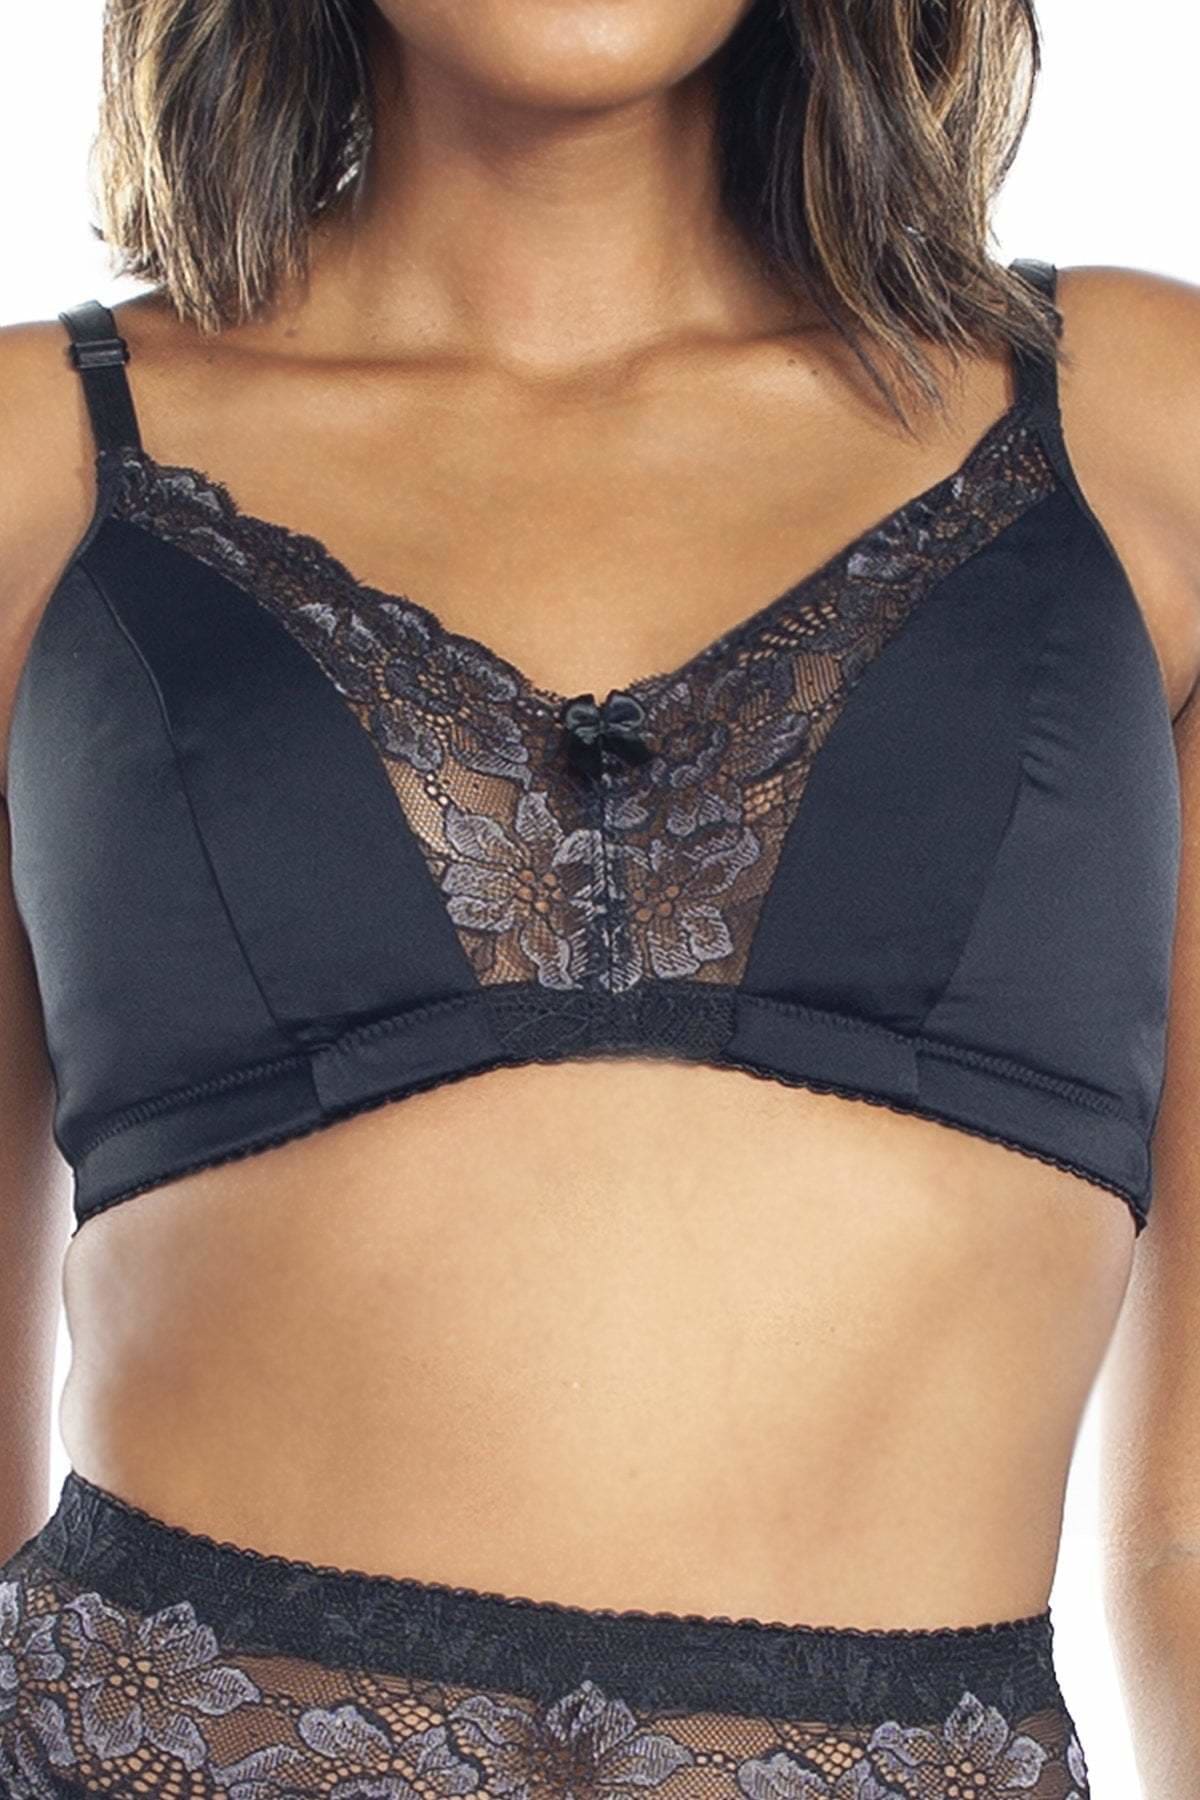 NEW Hope Full-Coverage Lace Contrast Bra